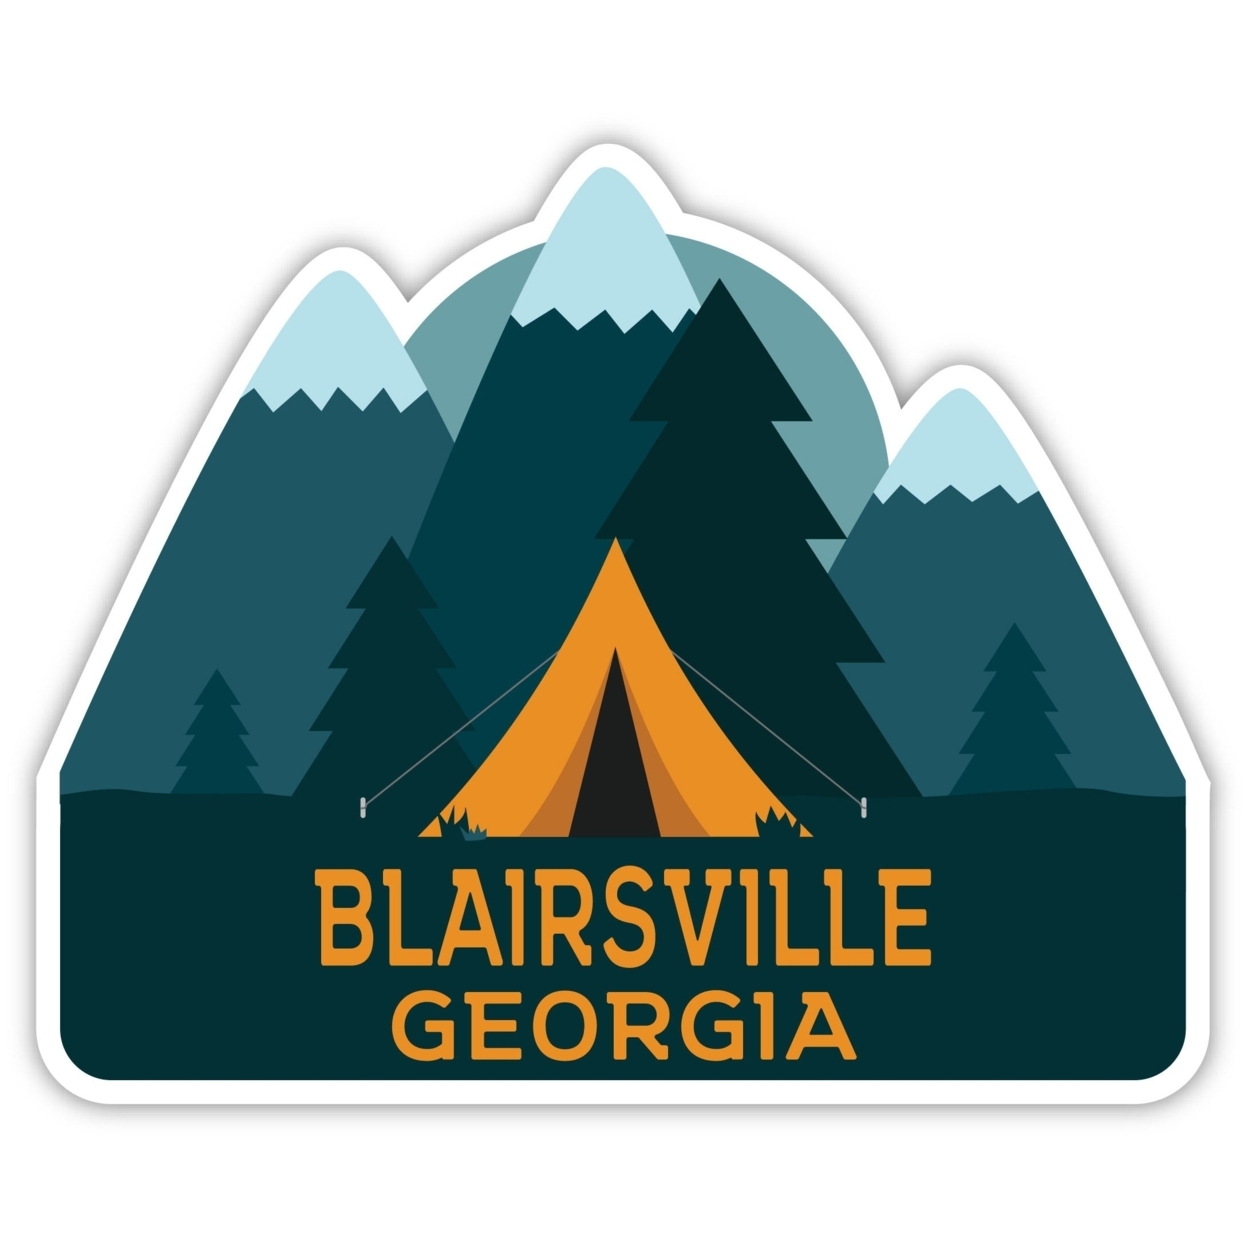 Blairsville Georgia Souvenir Decorative Stickers (Choose Theme And Size) - 4-Pack, 6-Inch, Tent